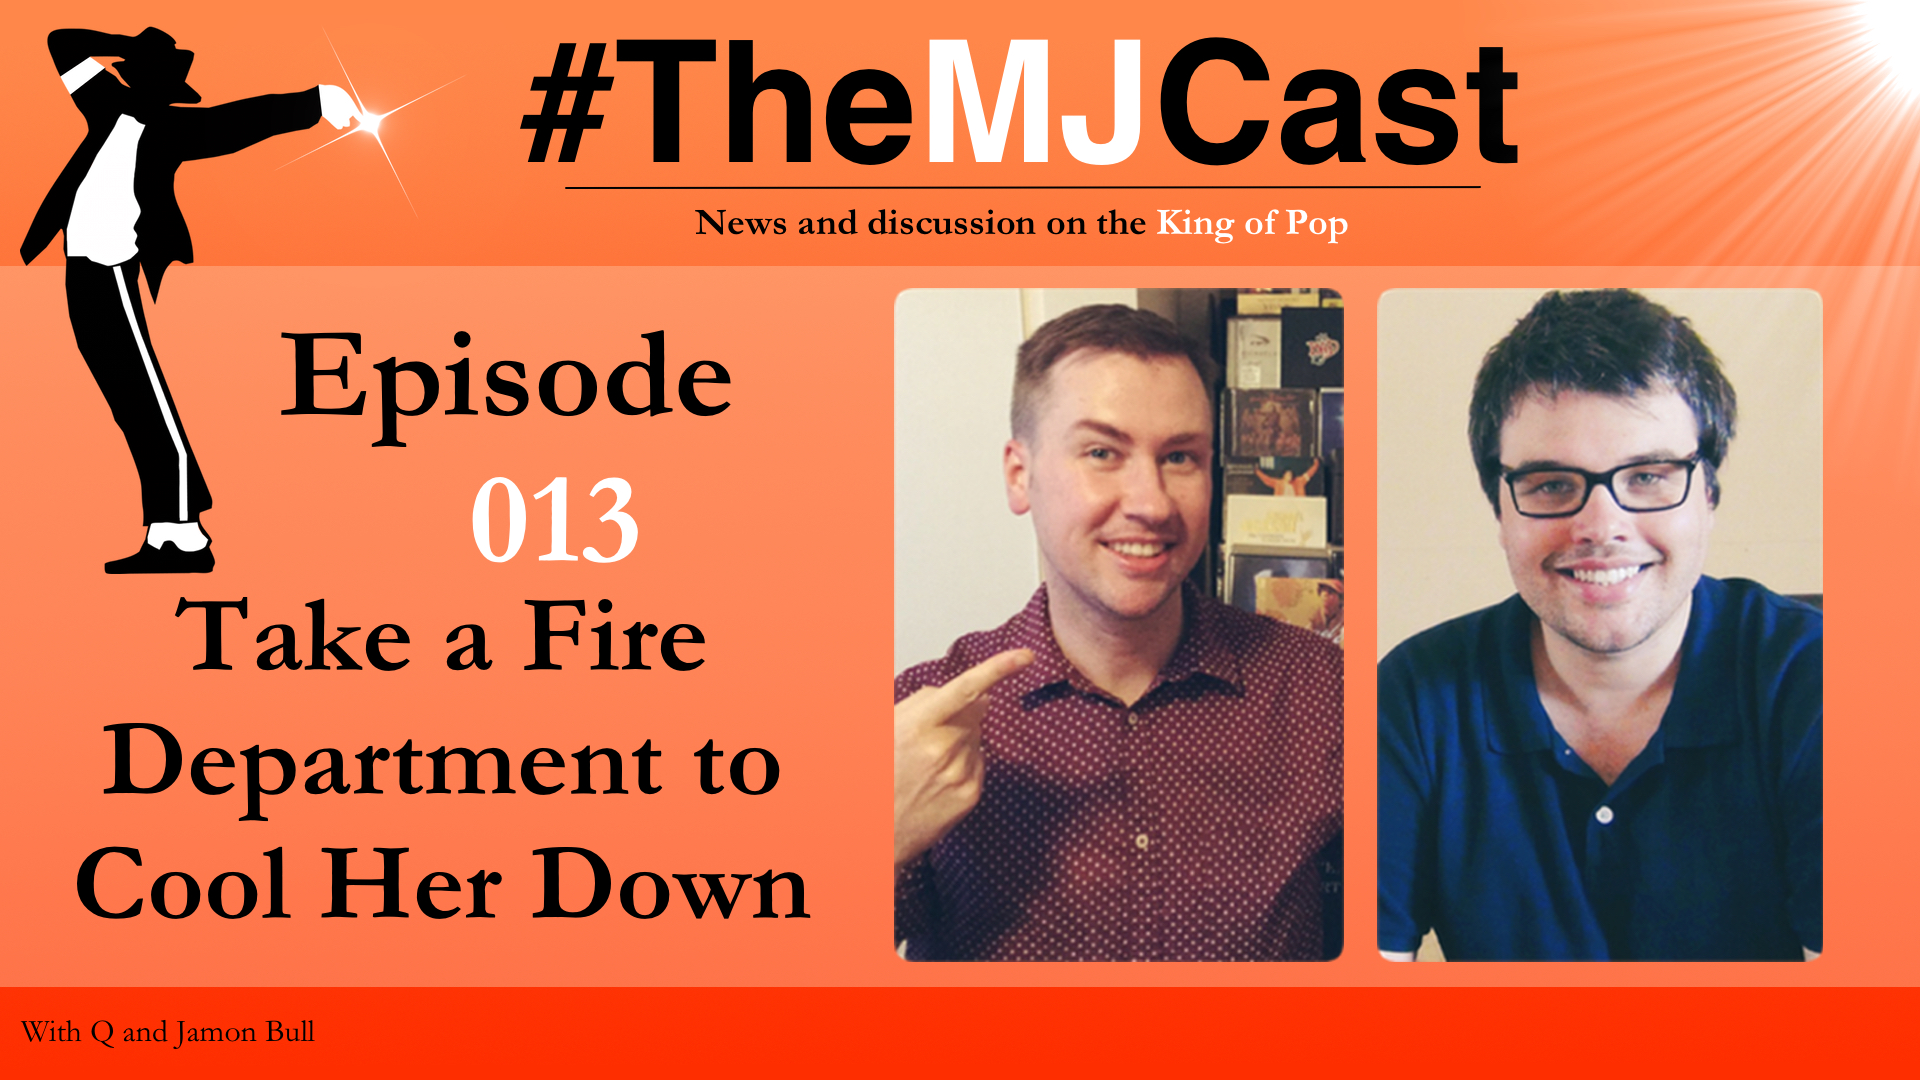 The MJCast Episode 013 - Take a Fire Department to Cool Her Down YouTube Art